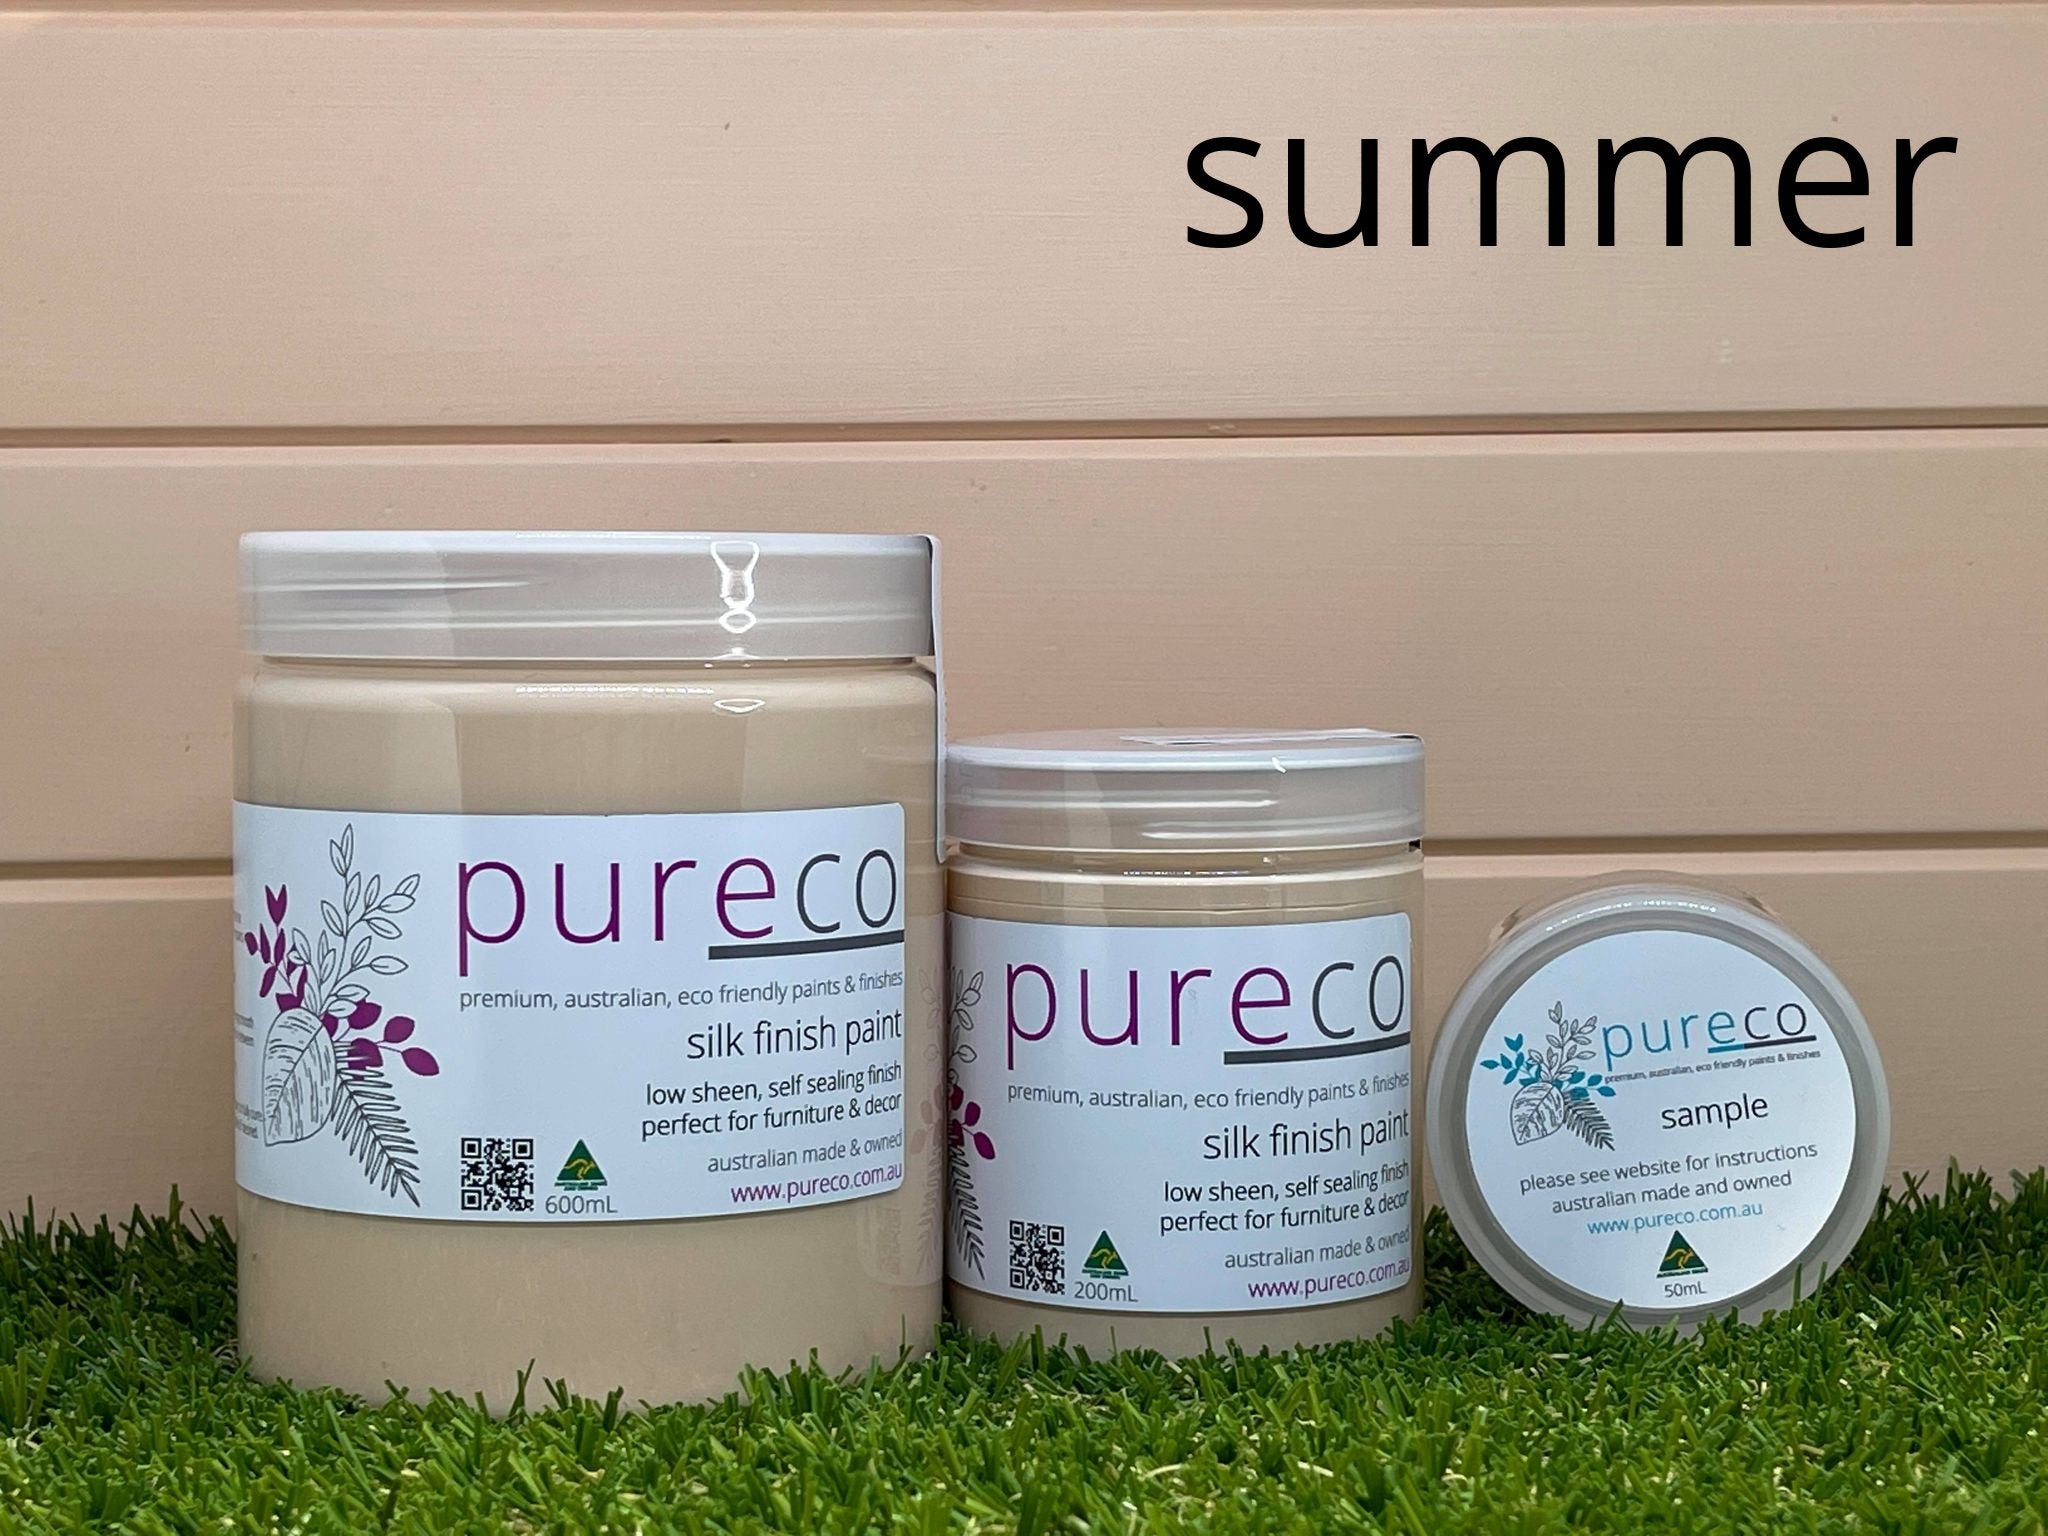 Pureco Silk Finish paint called summer a soft apricot colour with a soft satin sheen.